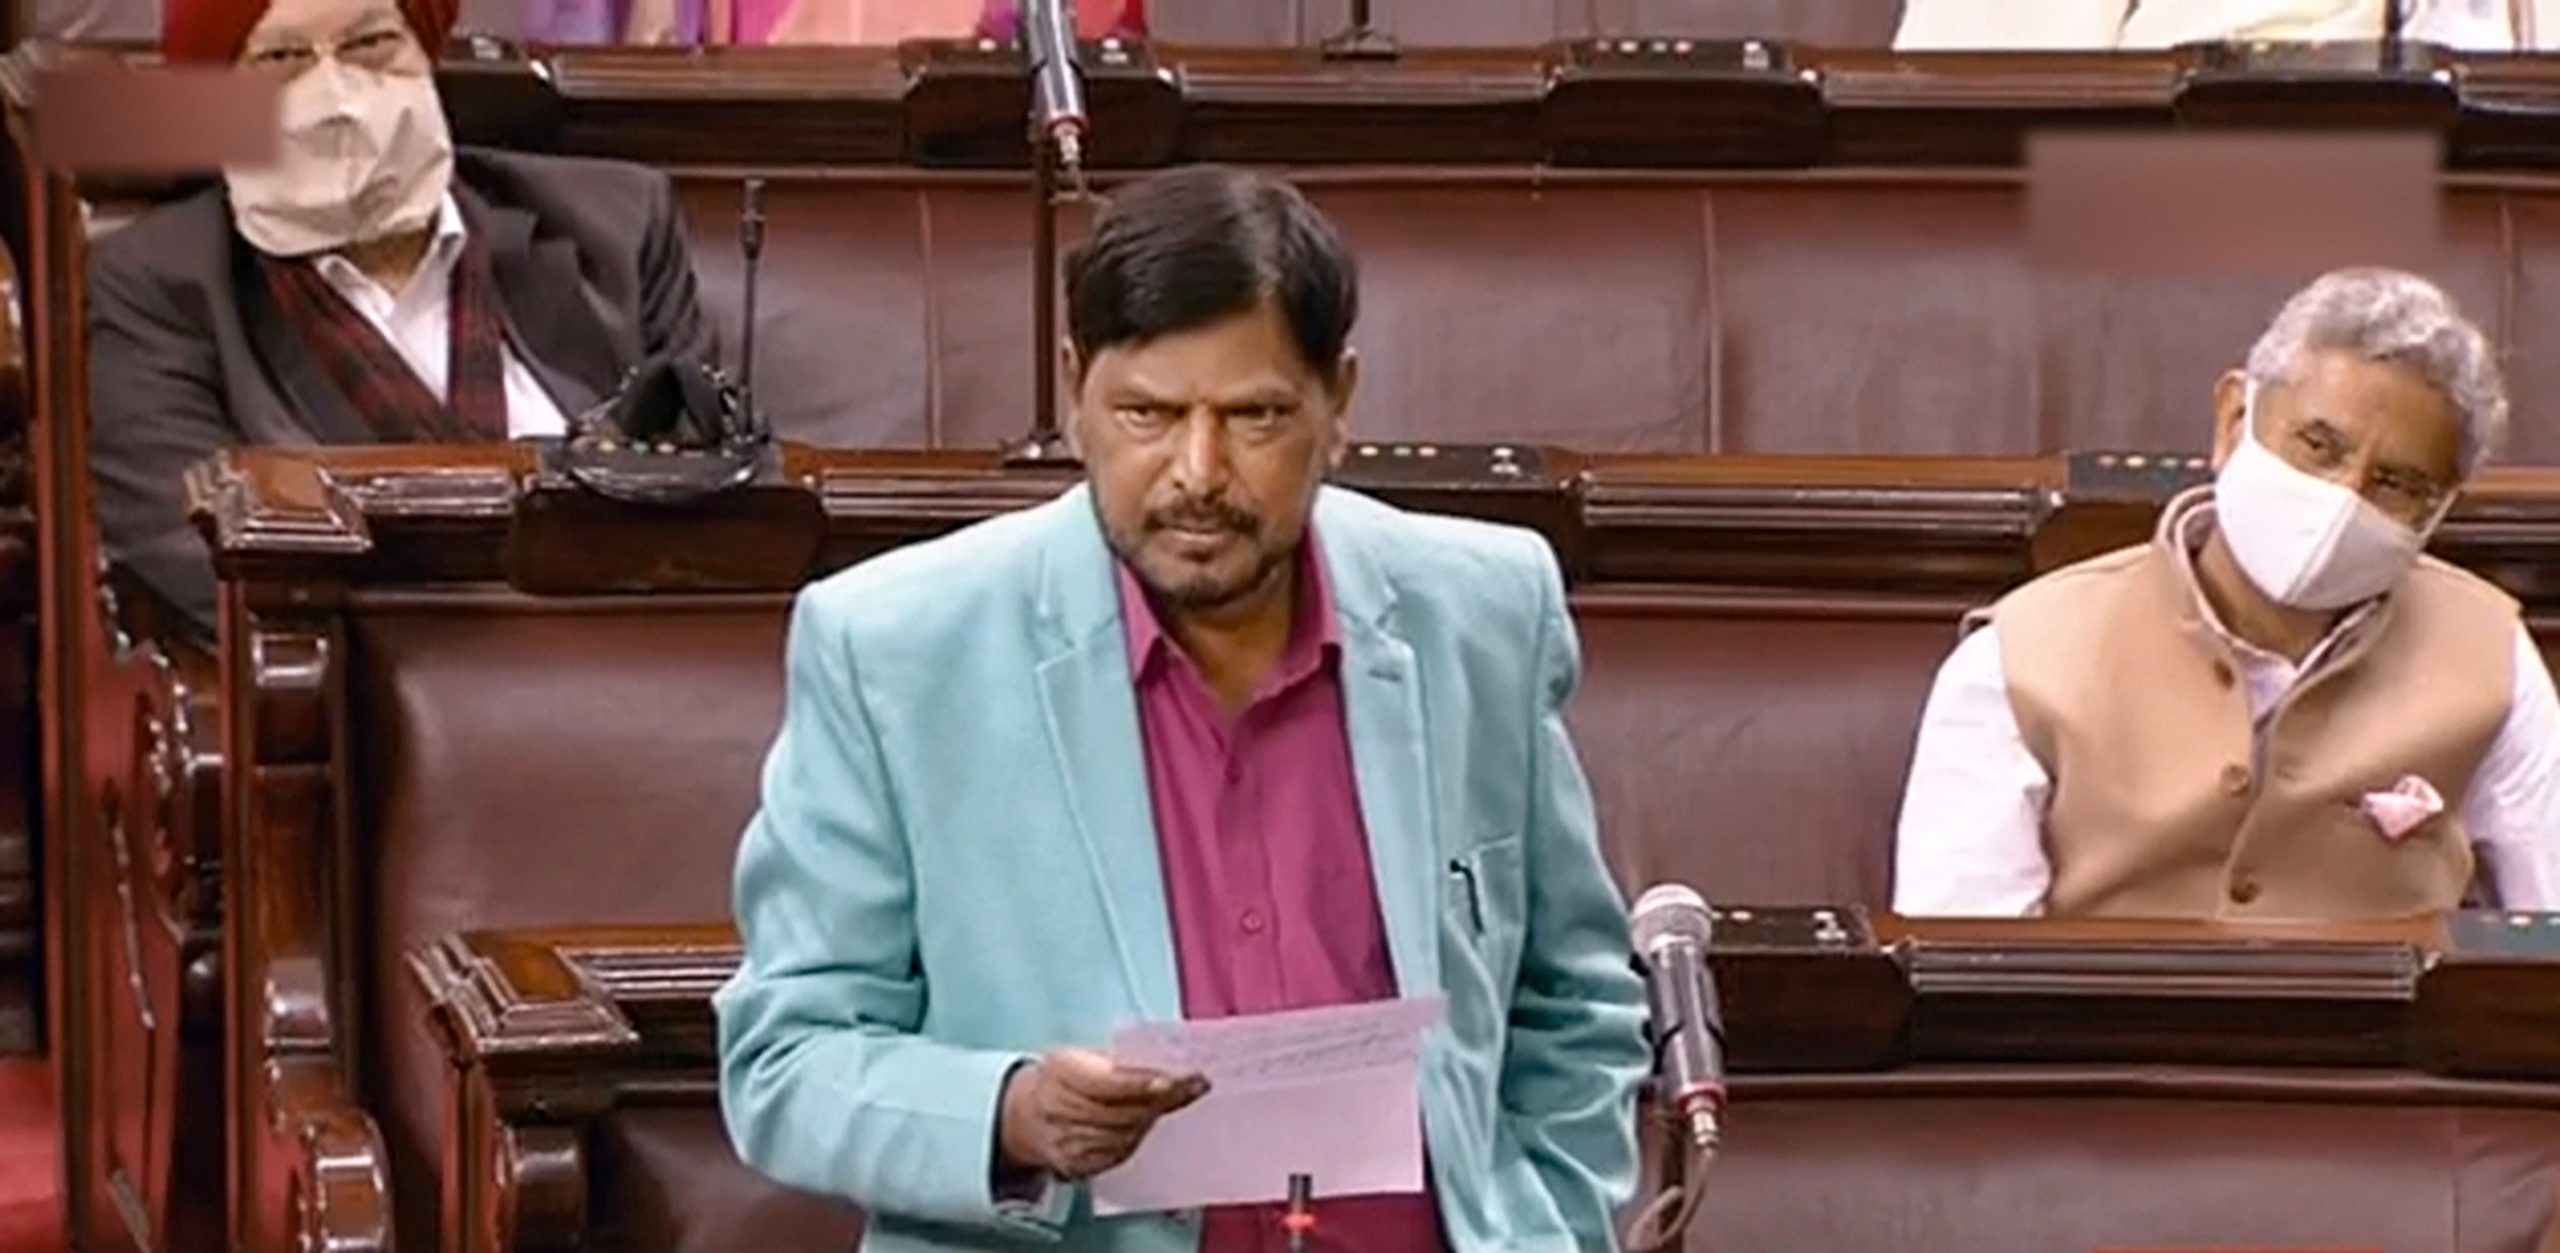 1,38,825 cases of atrocities against Dalits reported over 3 years: Ramdas Athawale